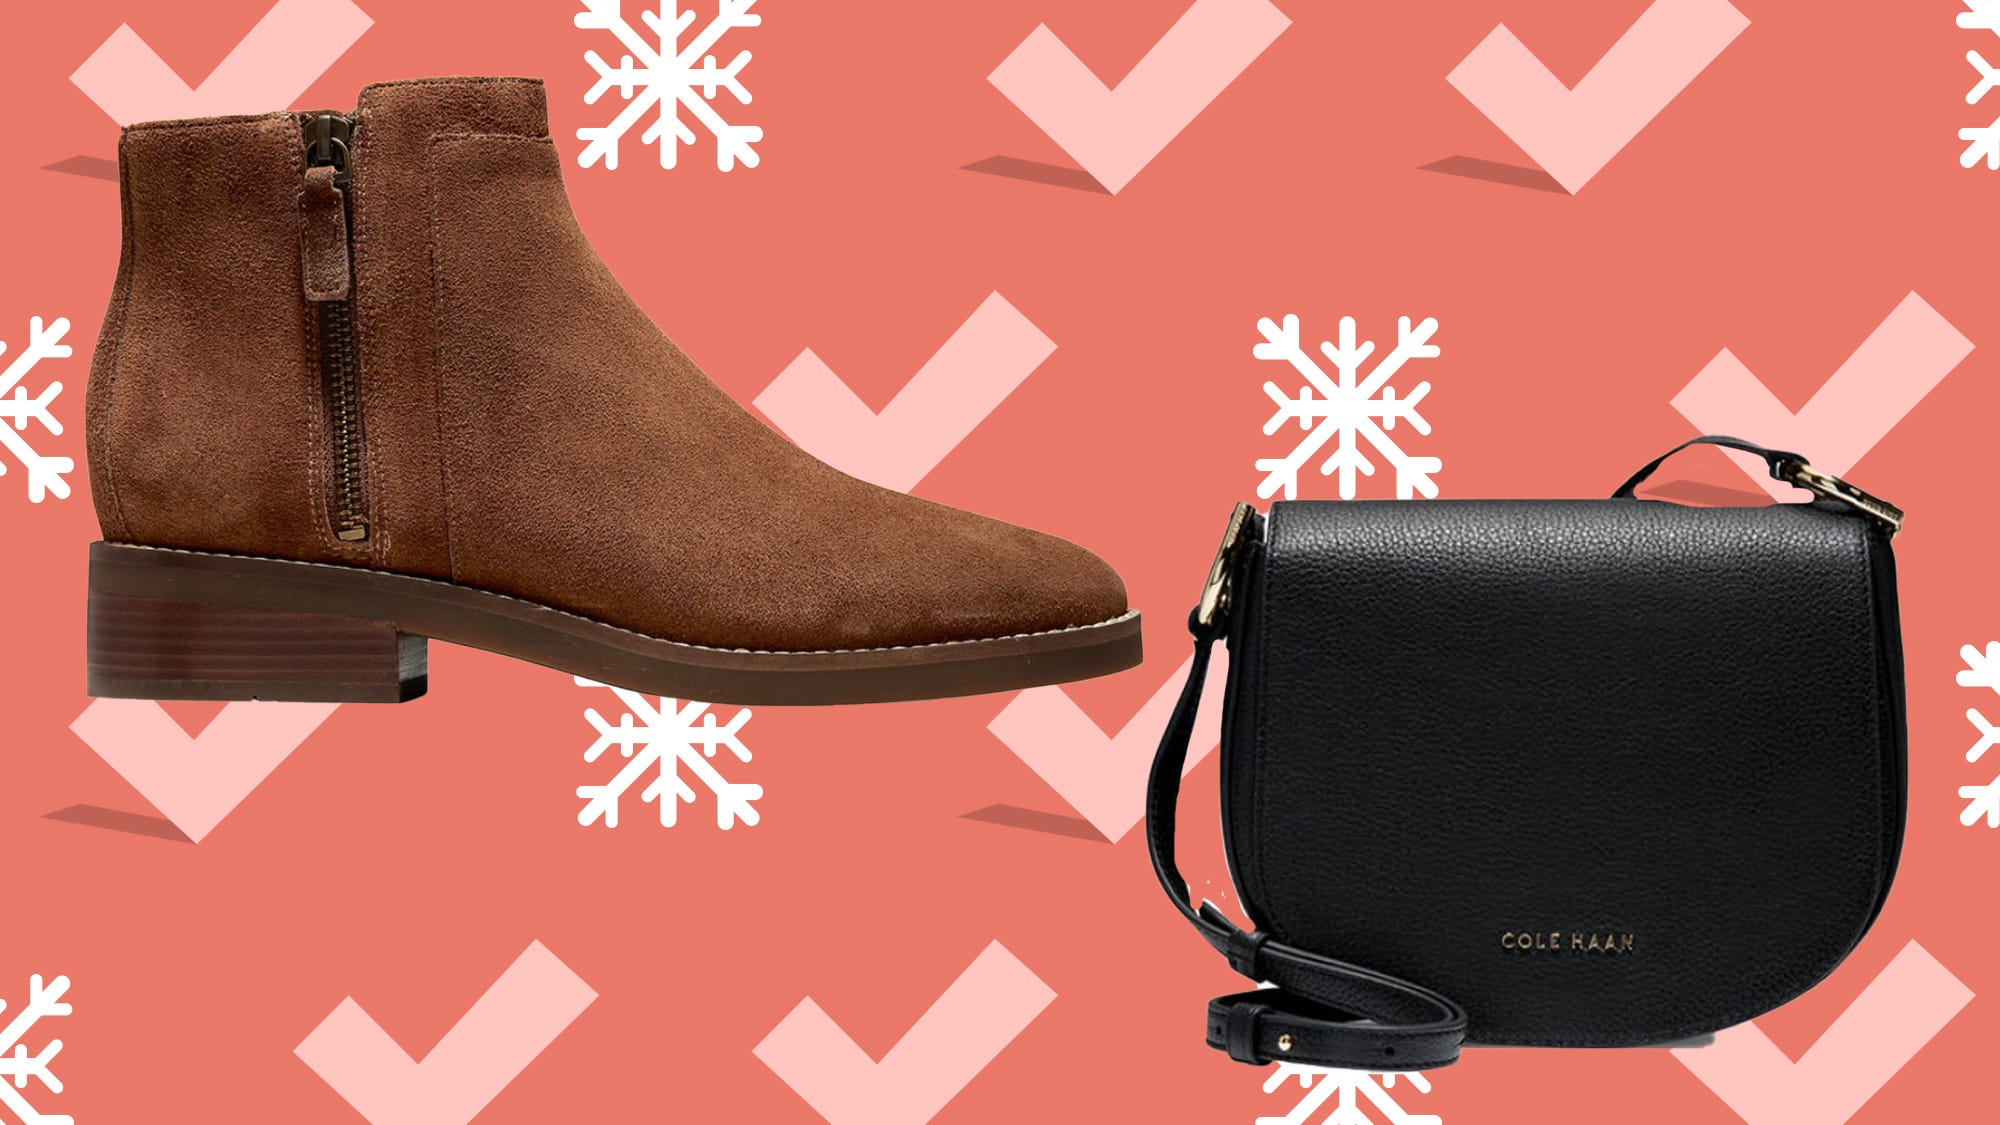 leather boots and bags on sale at Cole Haan